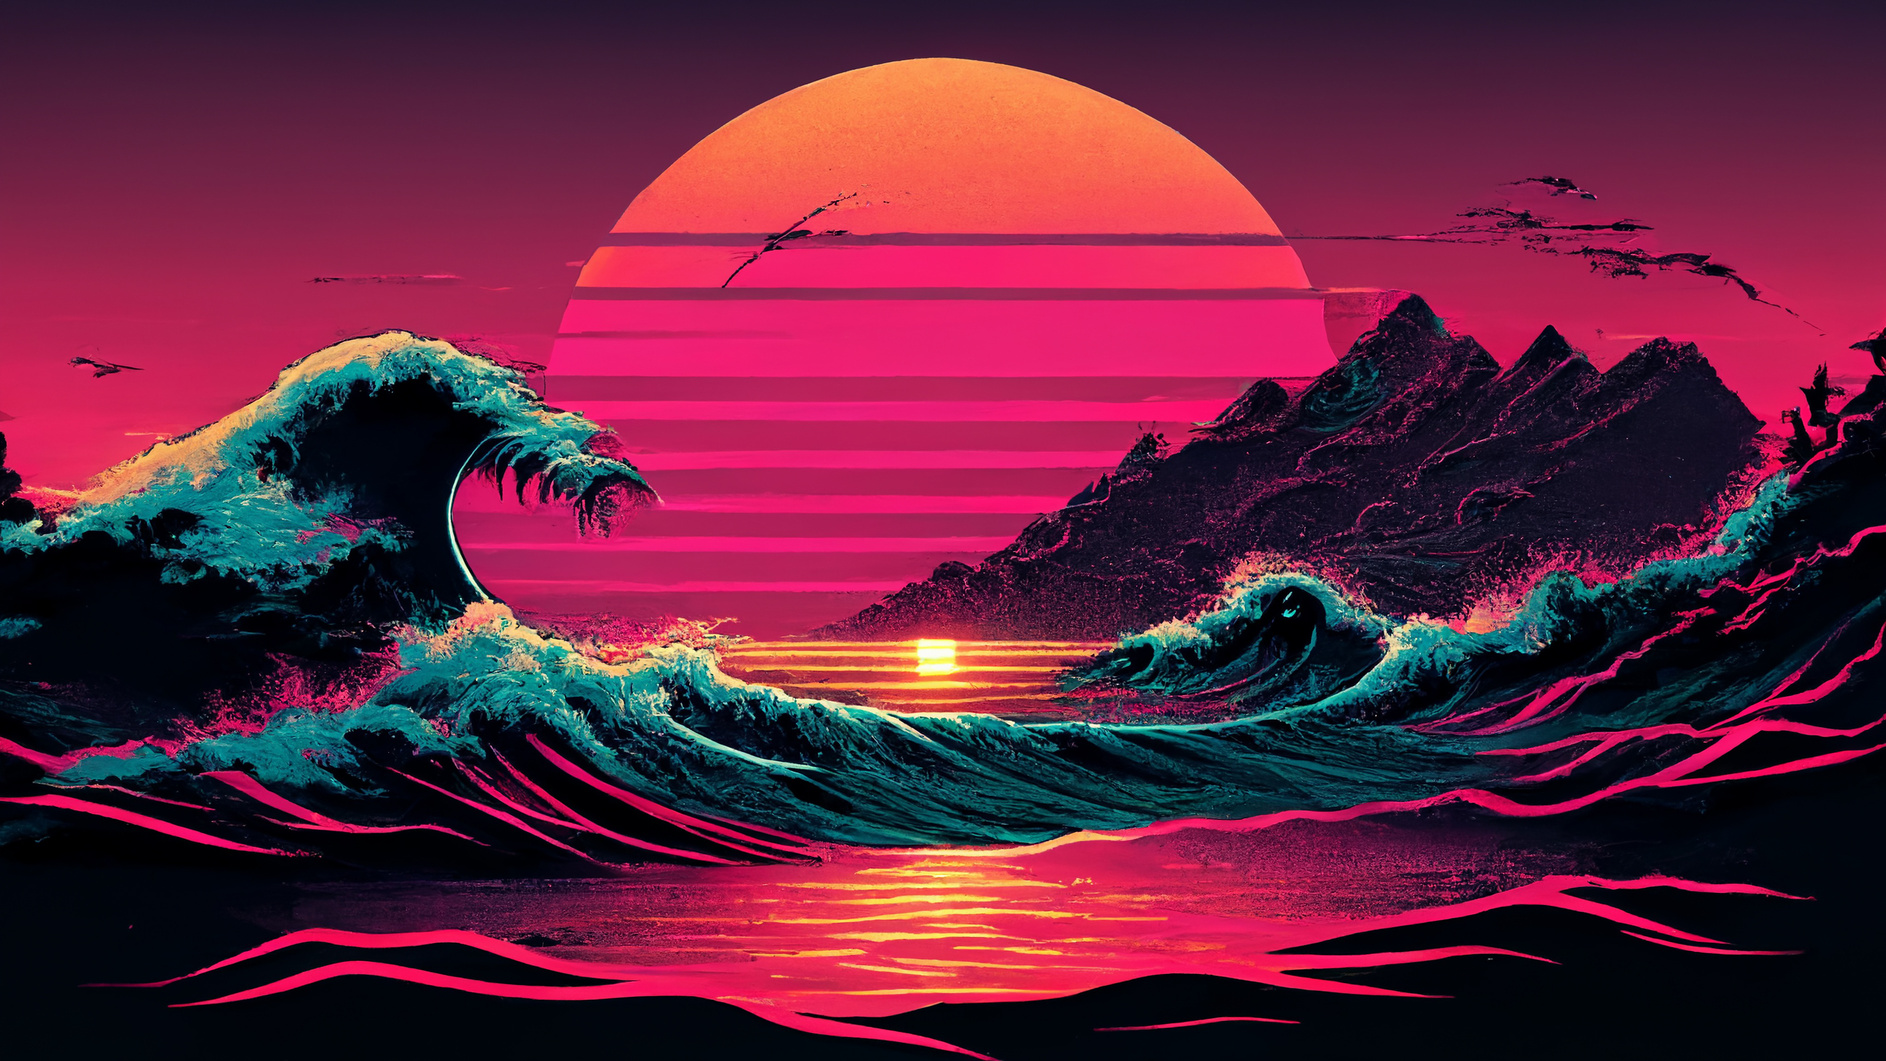 Synthwave sunset 80s retro beach landscape with arching wave